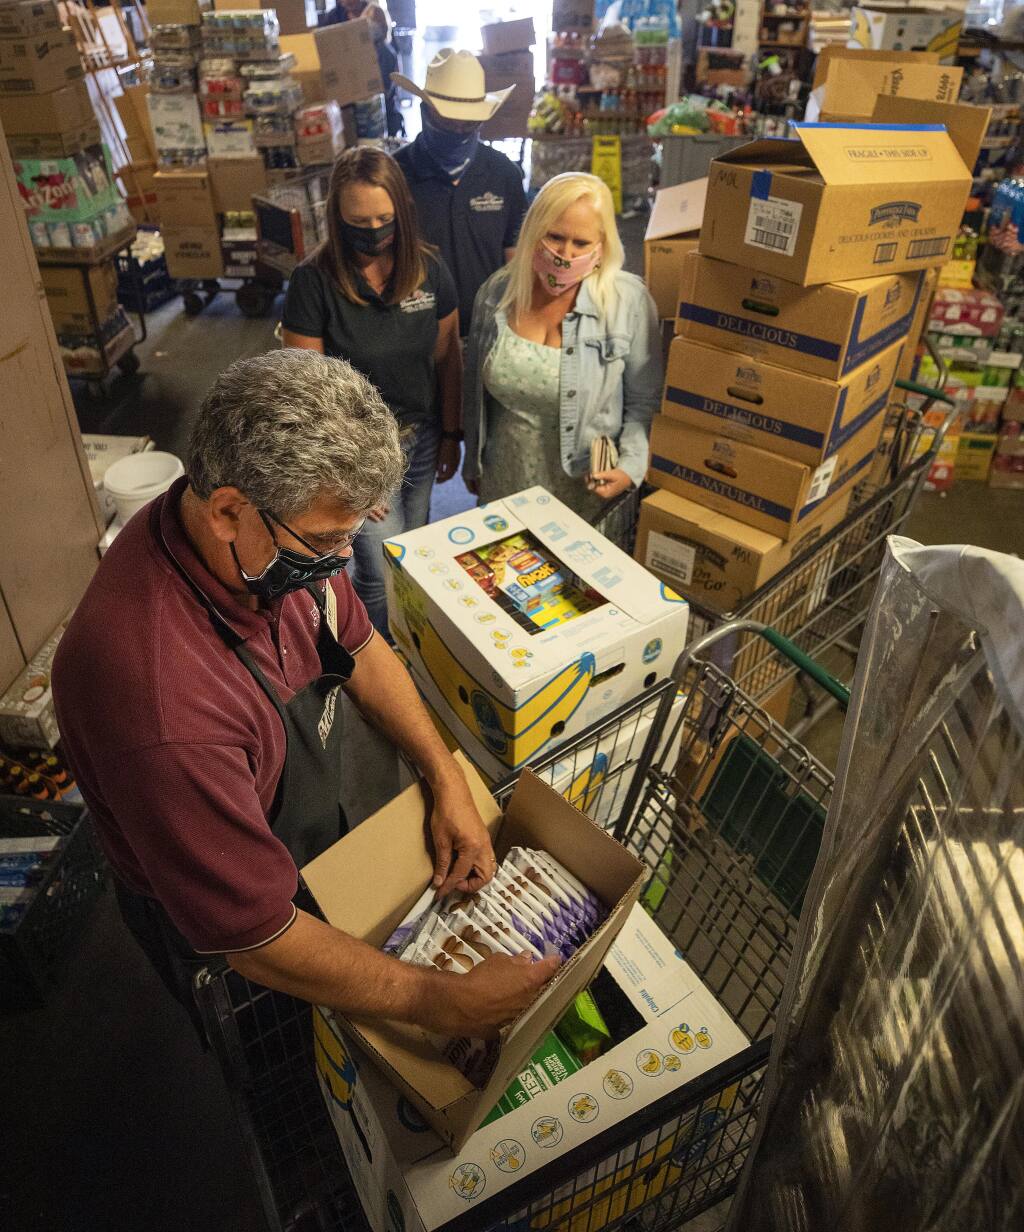 Joe Molsberry, owner of Molsberry’s Market,  goes through an inventory of snacks with Stephanie, Lori and Robbie Bisordi on Thursday, July 16, 2020. Stephanie and Robert Bisordi, who have been farming the same River Road ranch for generations, started Lunches for Lifesavers to bring meals to Sutter Hospital workers during the coronavirus pandemic. (John Burgess/The Press Democrat)